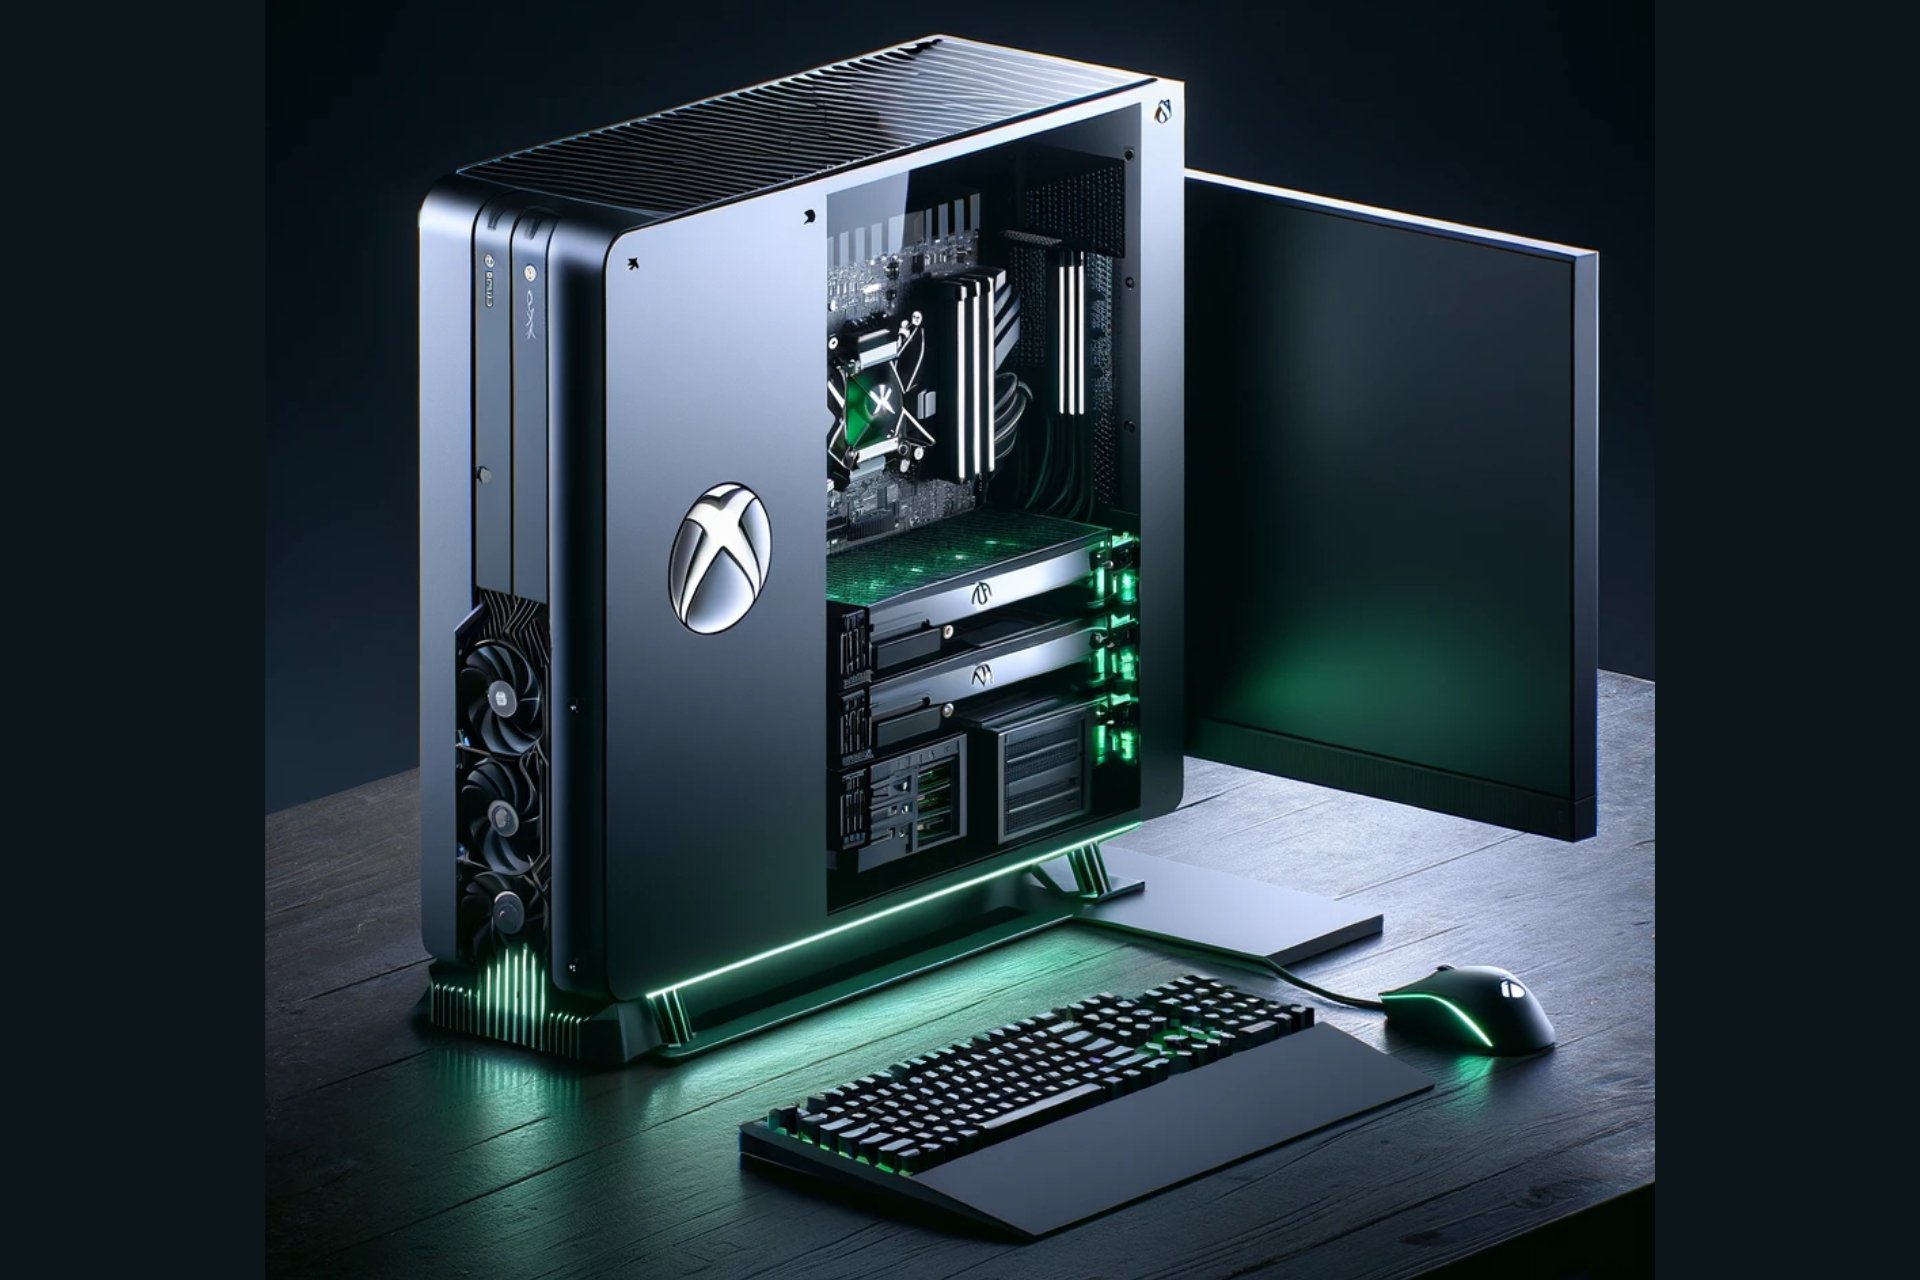 When you will buy the next Xbox console, it will be more like a PC